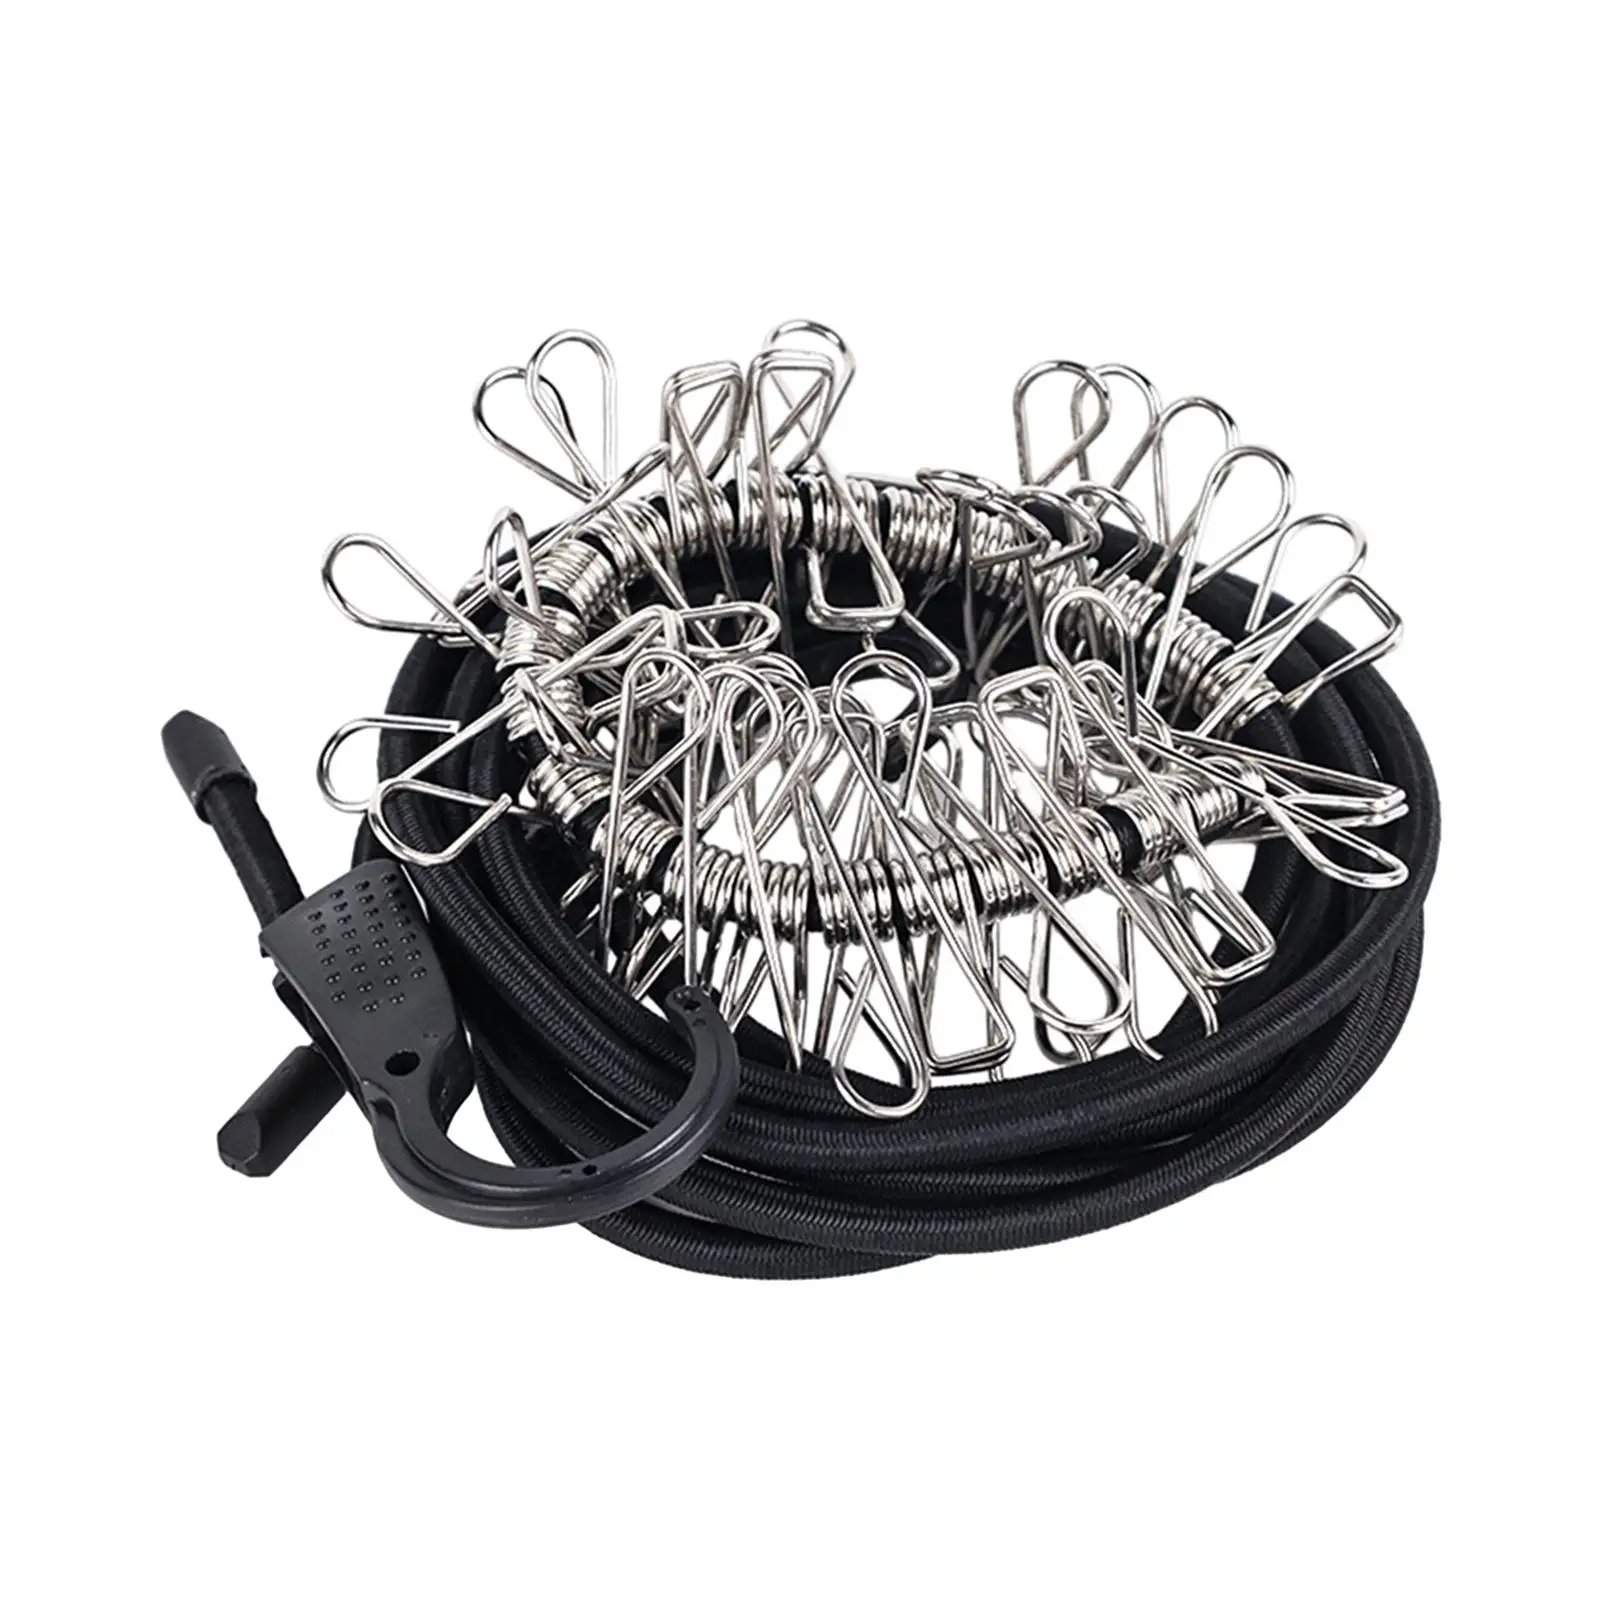 Bungee Cord with Hooks with Clips for Moving Camping Bikes Luggage Rack